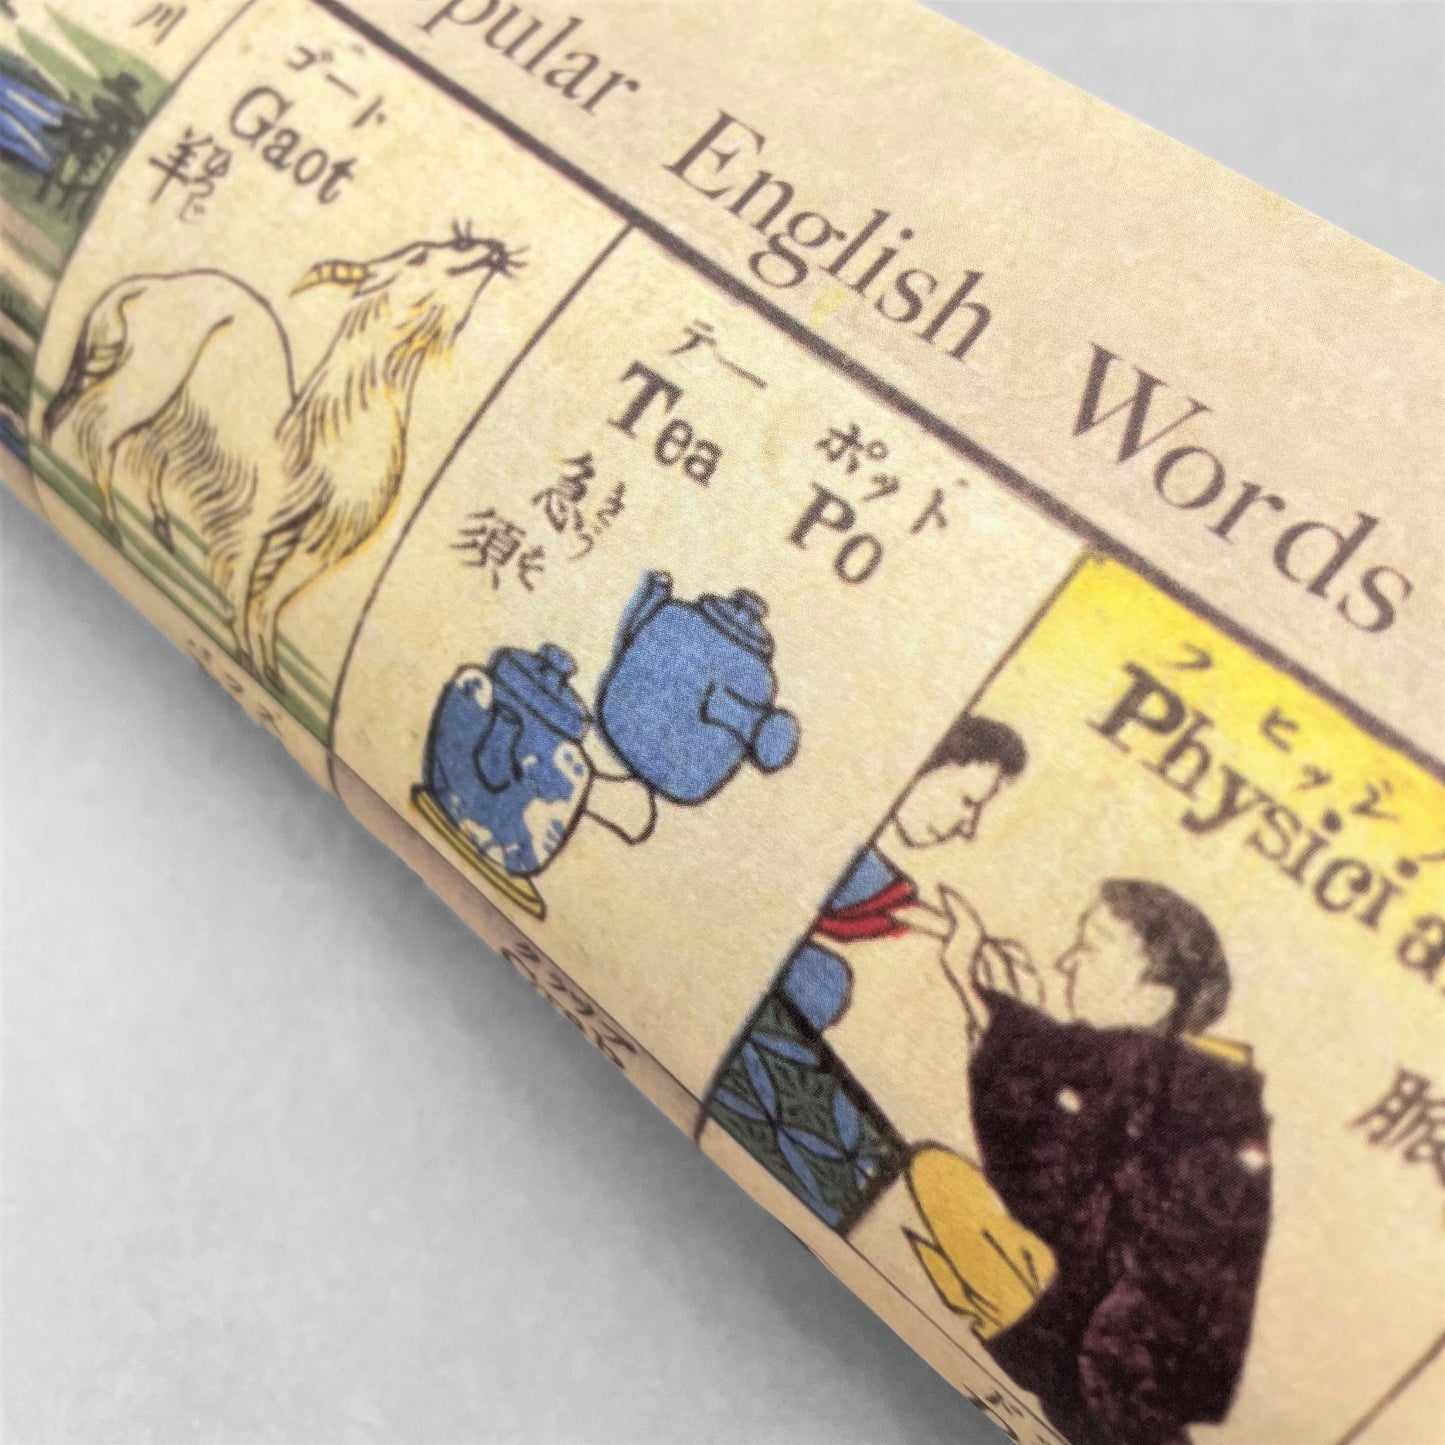 poster wrapping paper with japanese images of english words by The Pattern Book